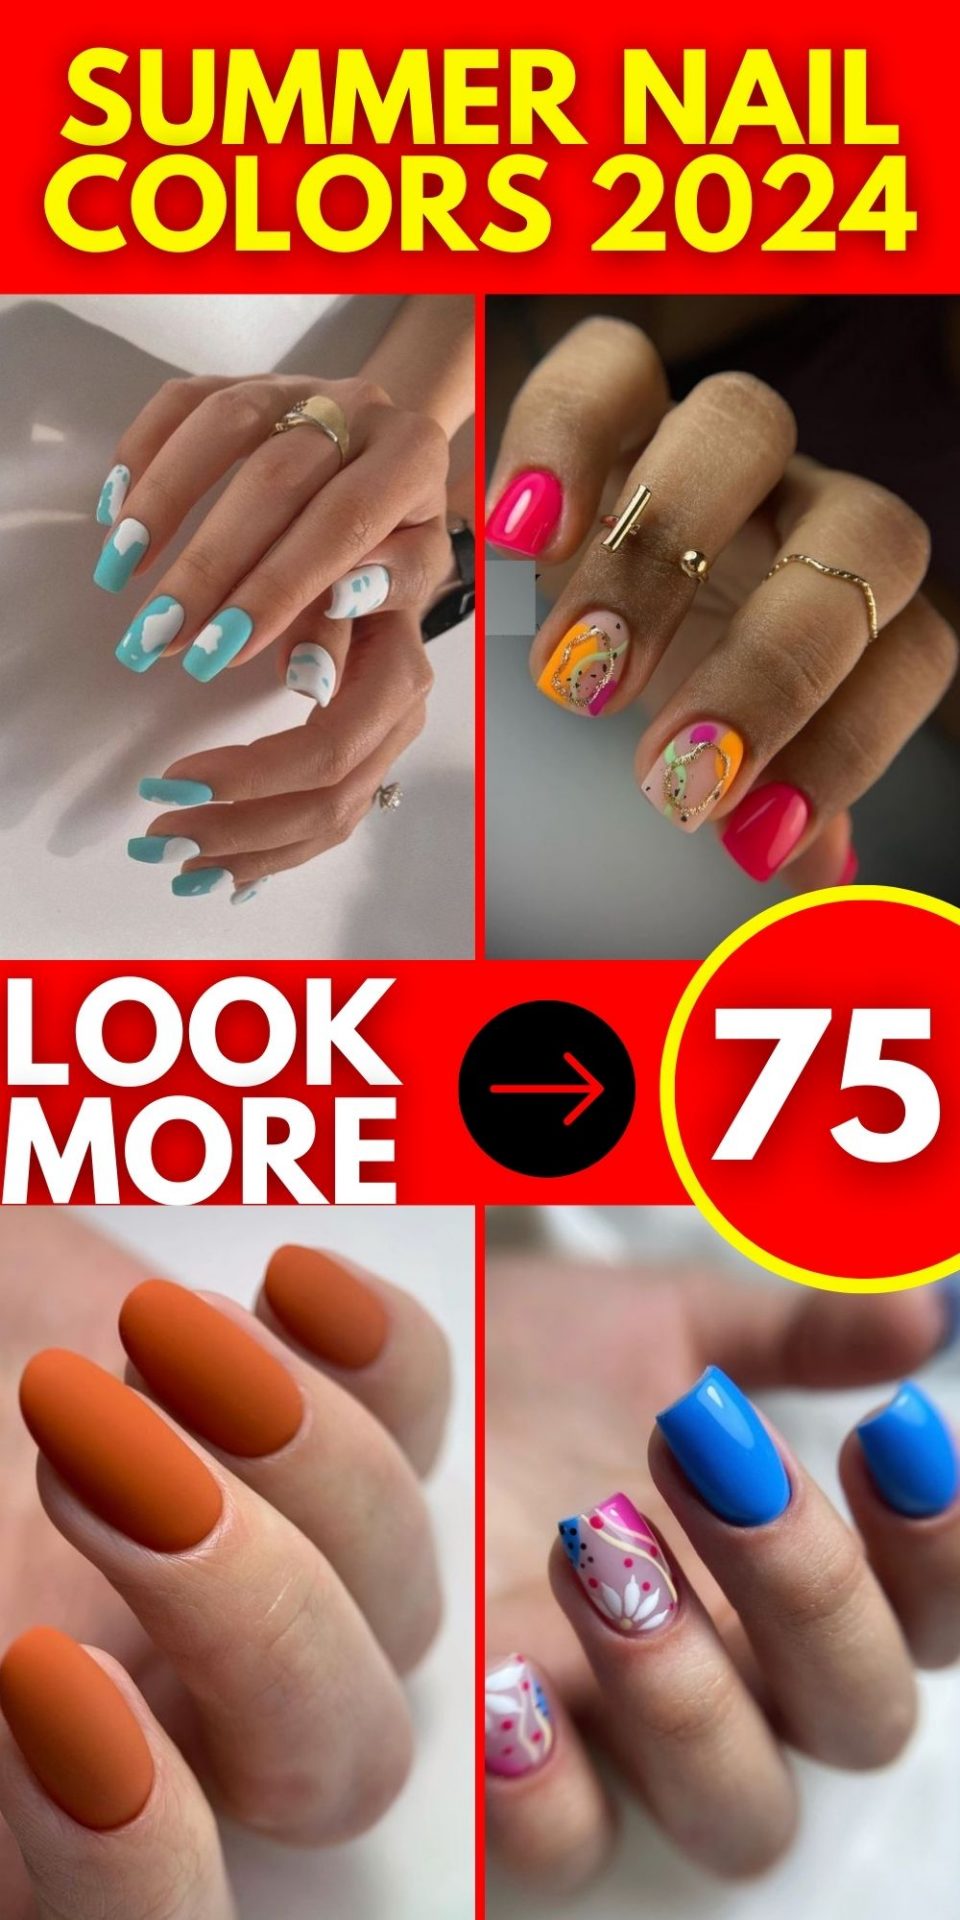 Best Summer Nail Colors 2024 Trendy Designs and Bright Ideas